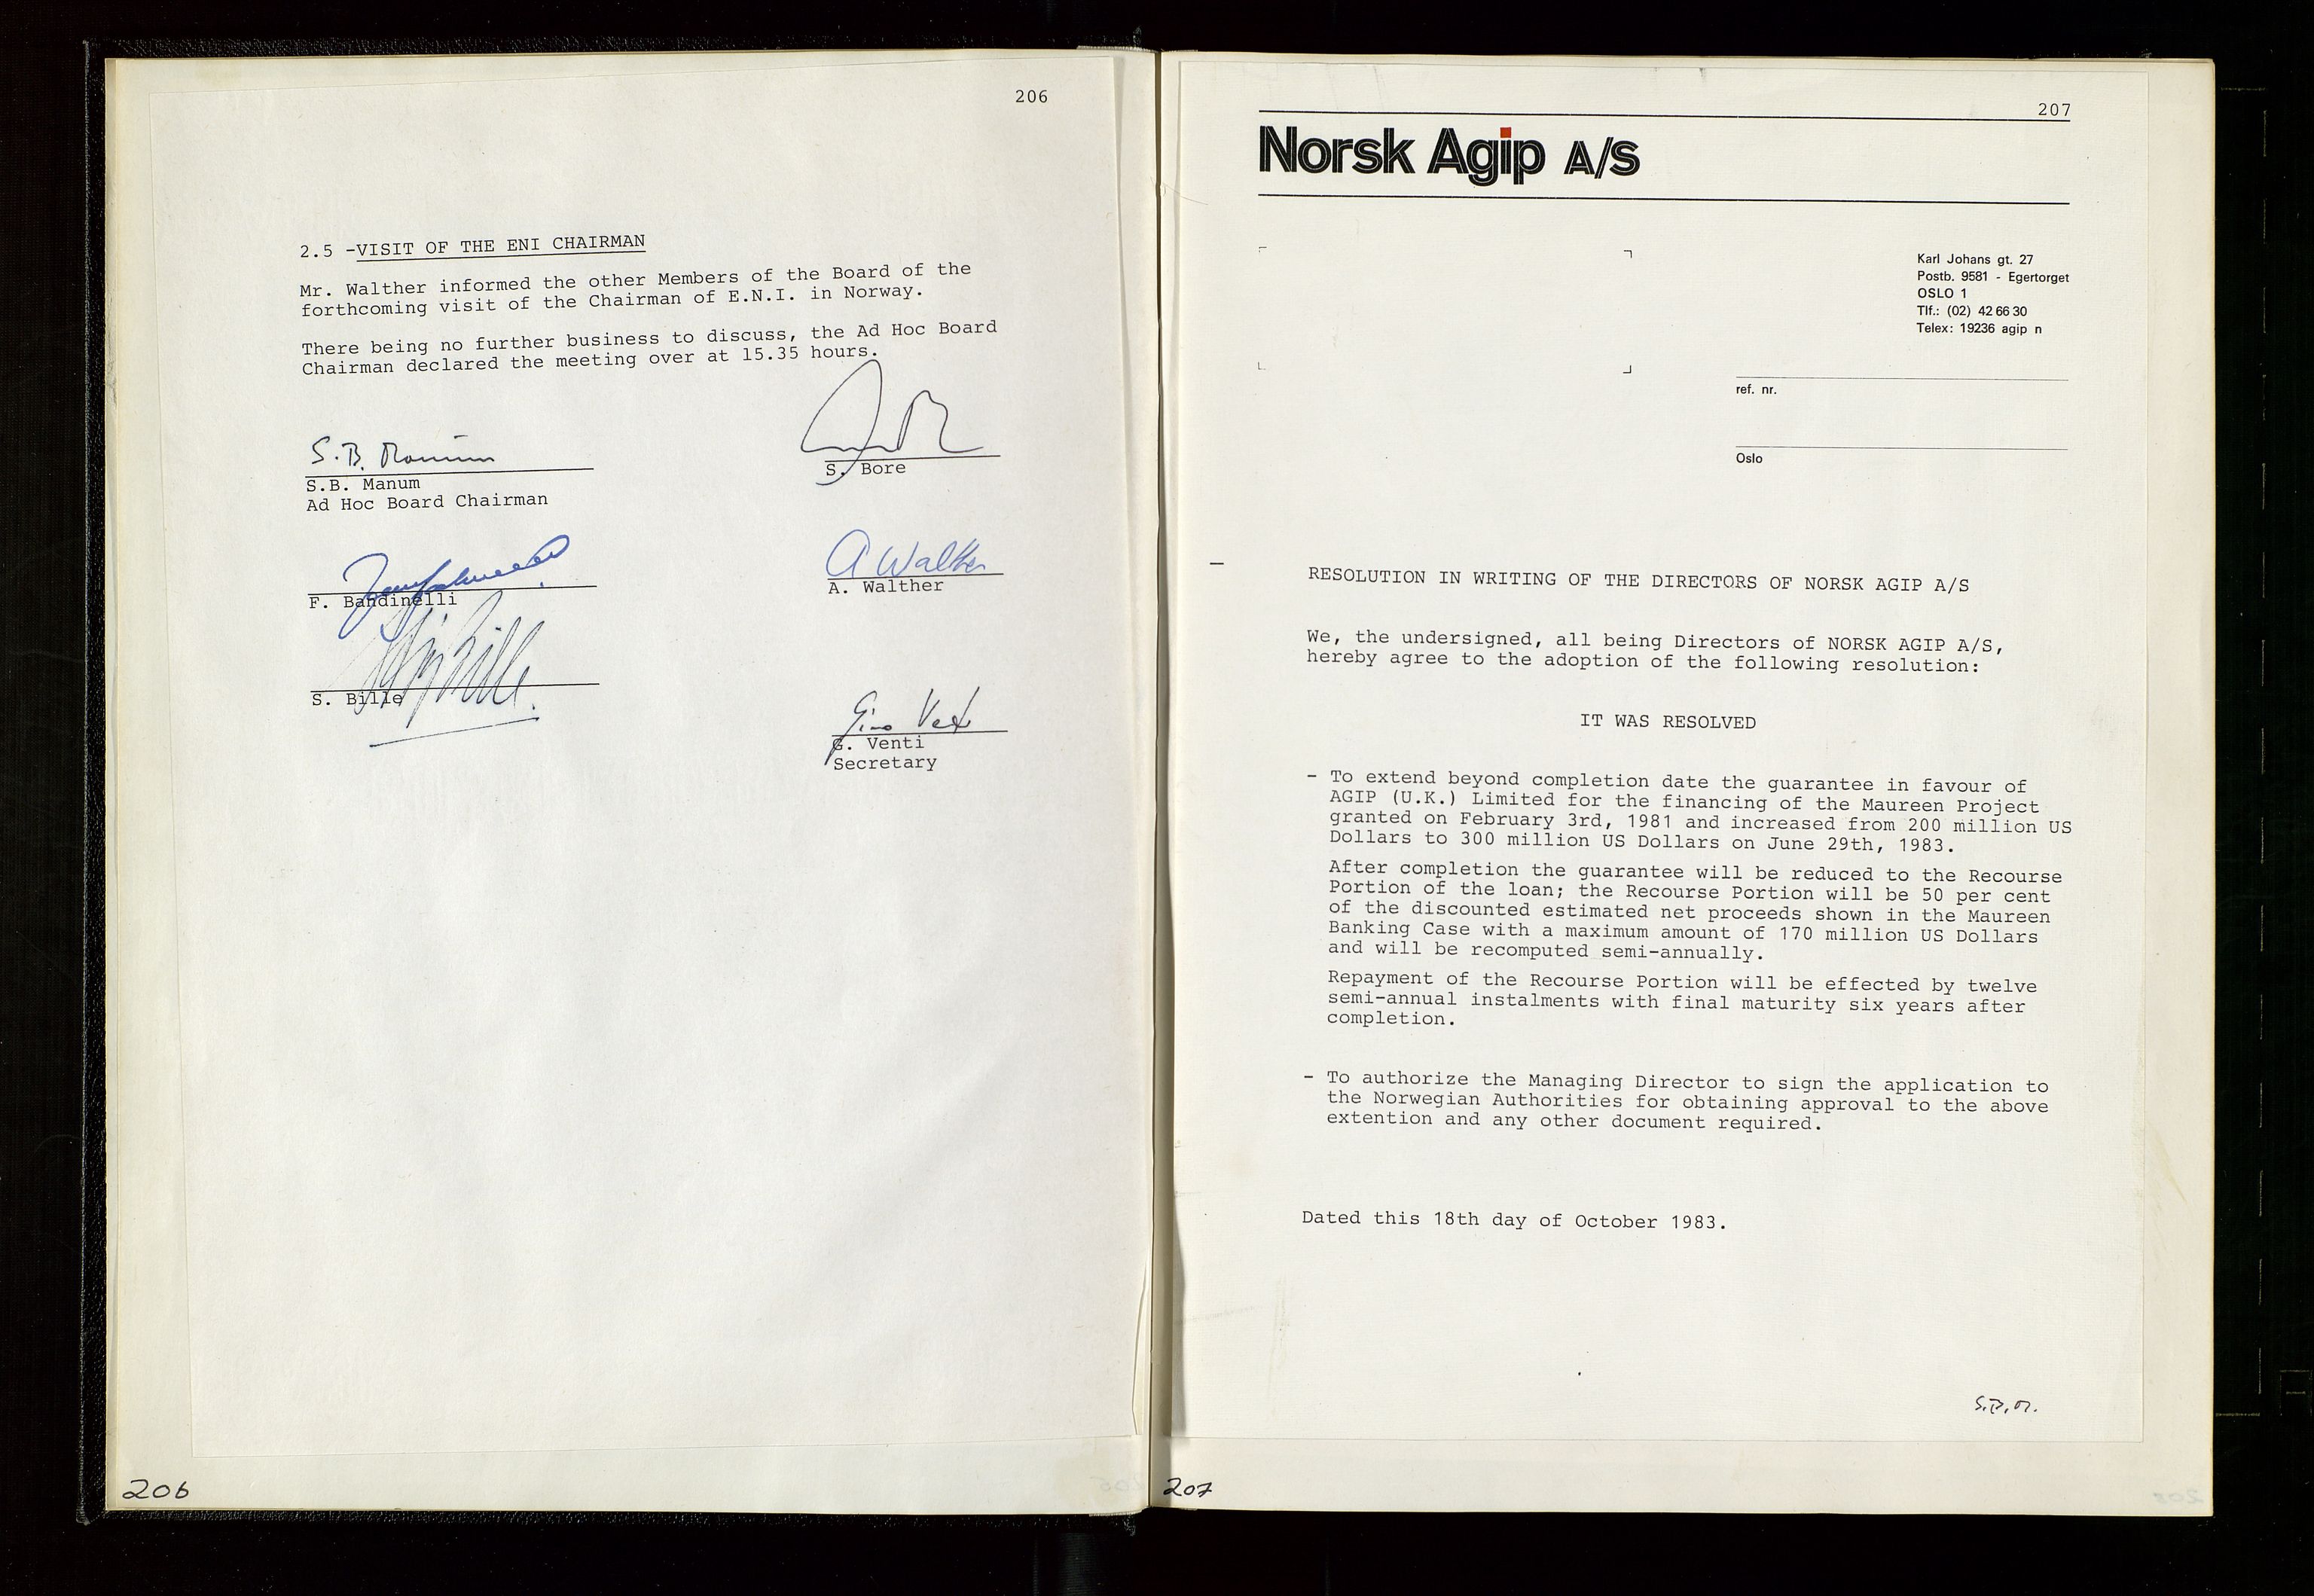 Pa 1583 - Norsk Agip AS, SAST/A-102138/A/Aa/L0003: Board of Directors meeting minutes, 1979-1983, s. 206-207